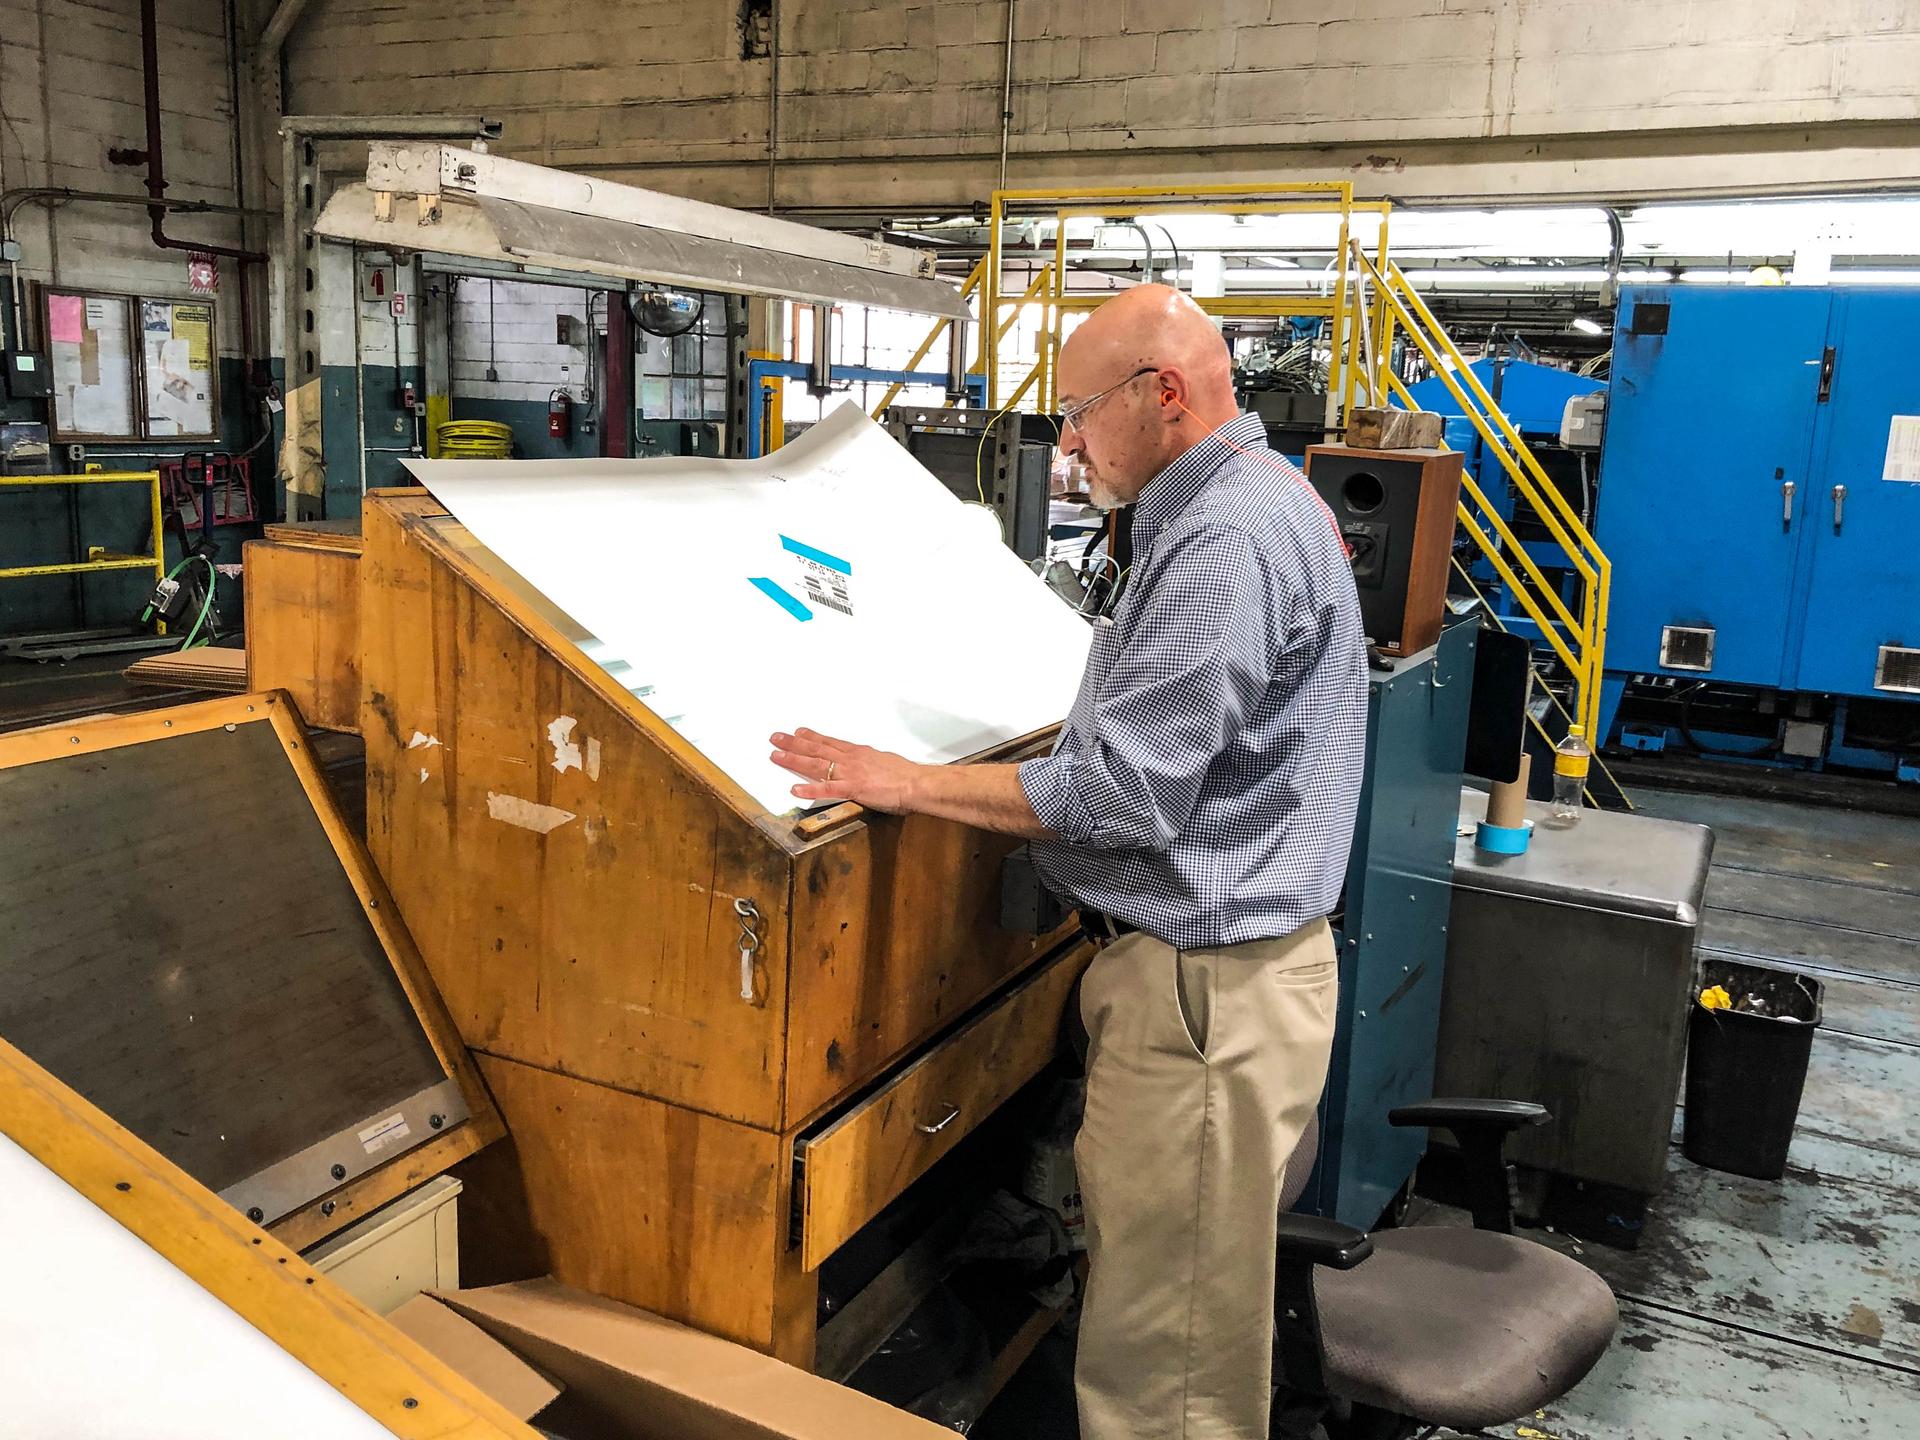 Mohawk paper engineer Paul Graver examines a new batch of paper looking for impurities.